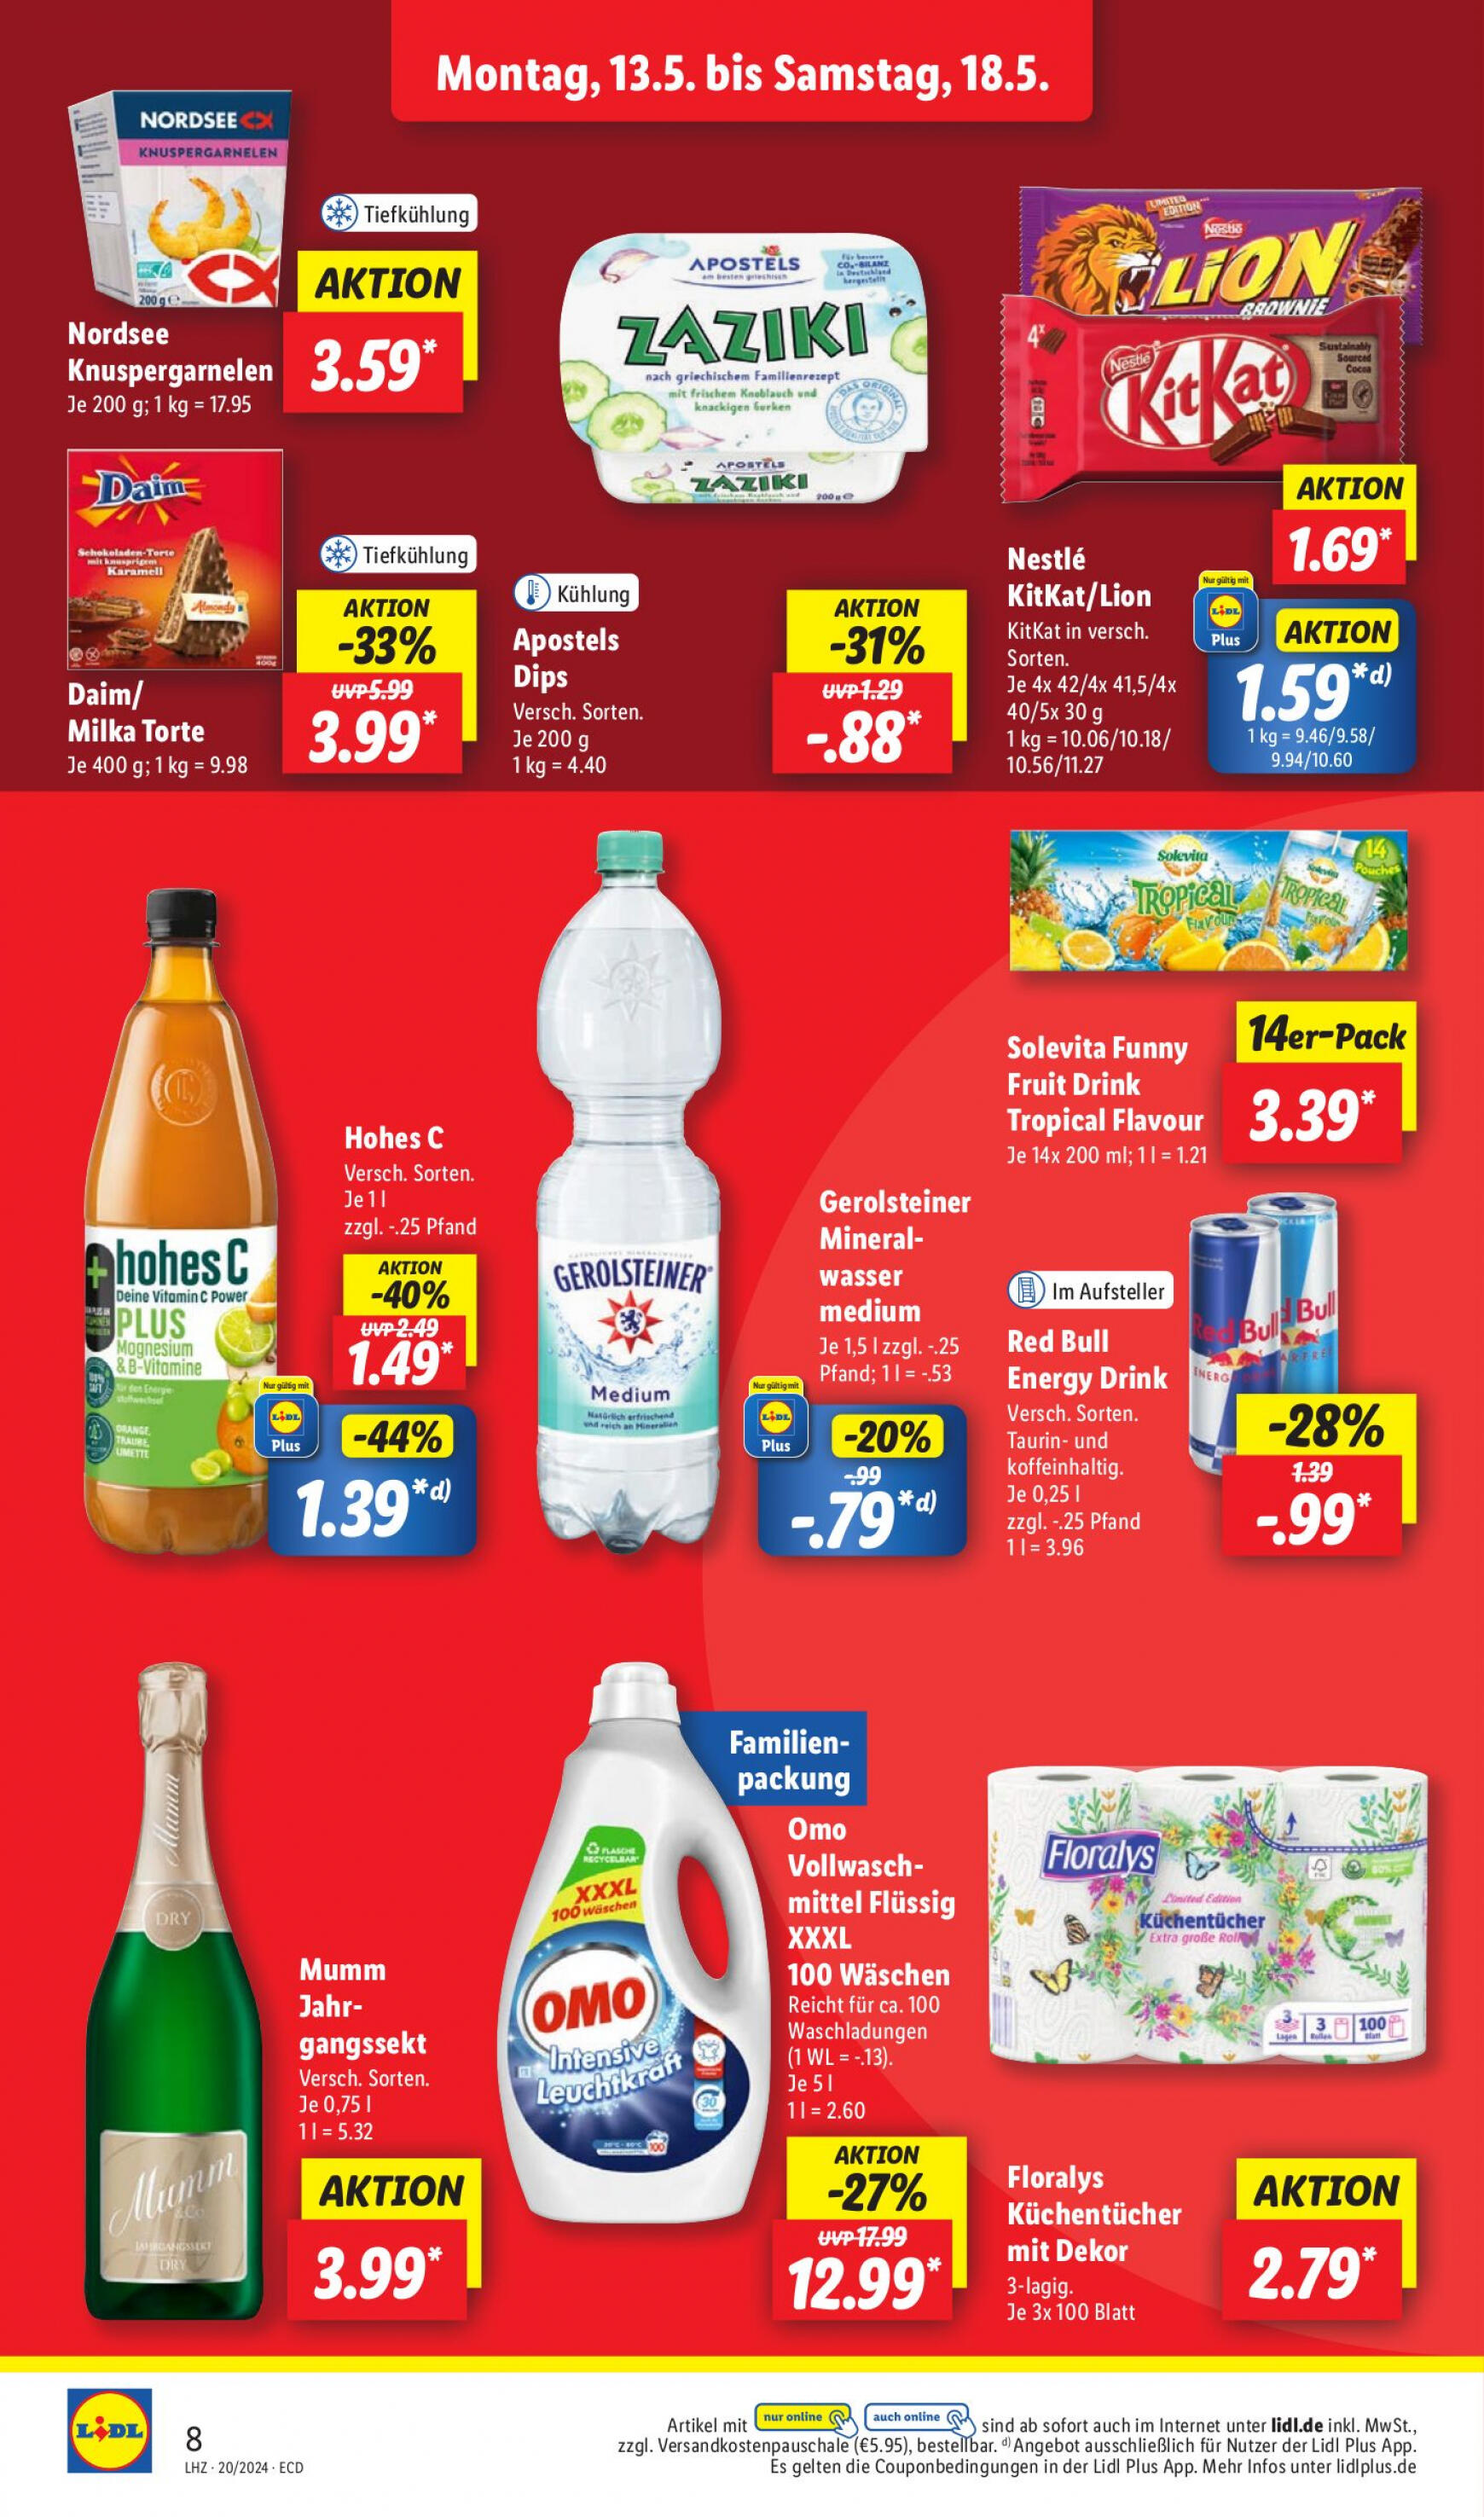 lidl - Flyer Lidl aktuell 13.05. - 18.05. - page: 10